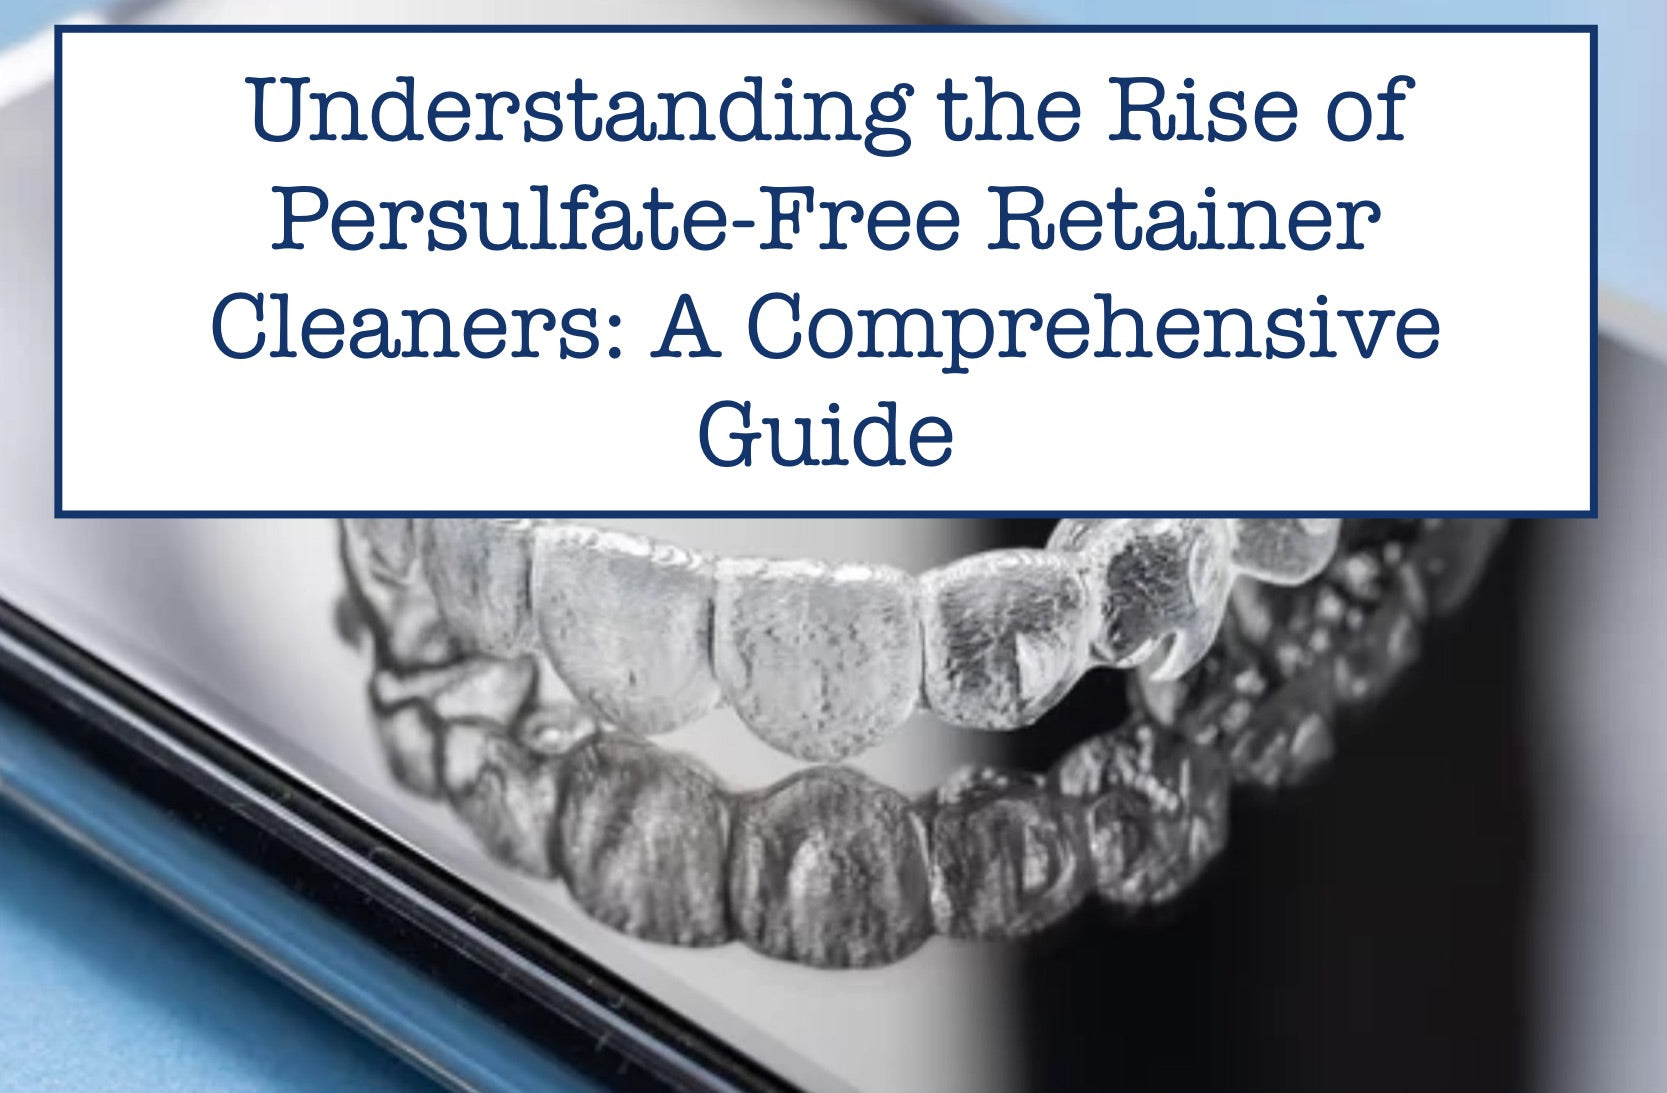 Understanding the Rise of Persulfate-Free Retainer Cleaners: A Comprehensive Guide